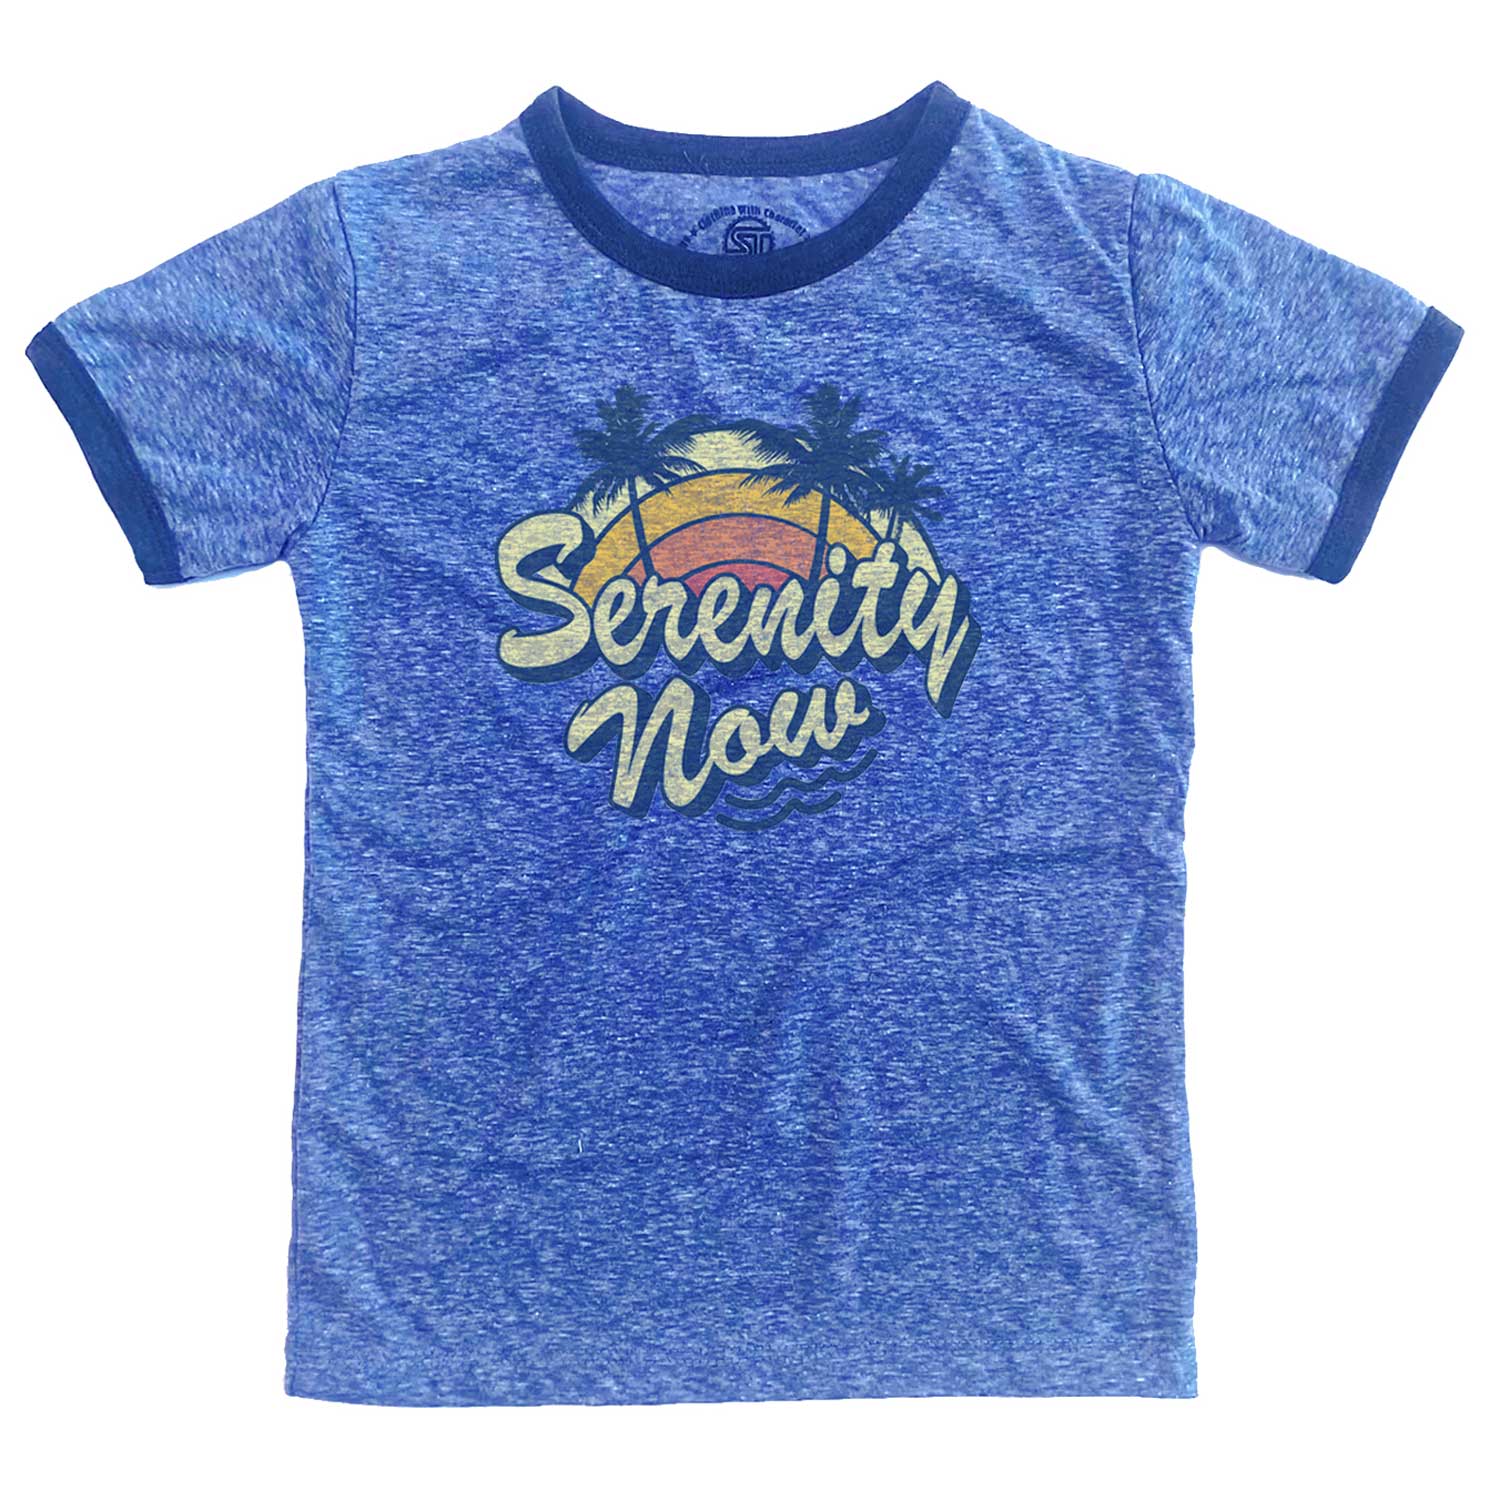 Kids Serenity Now Cool Summer Graphic T-Shirt | Cute Retro Beach Vacation Tee | Solid Threads